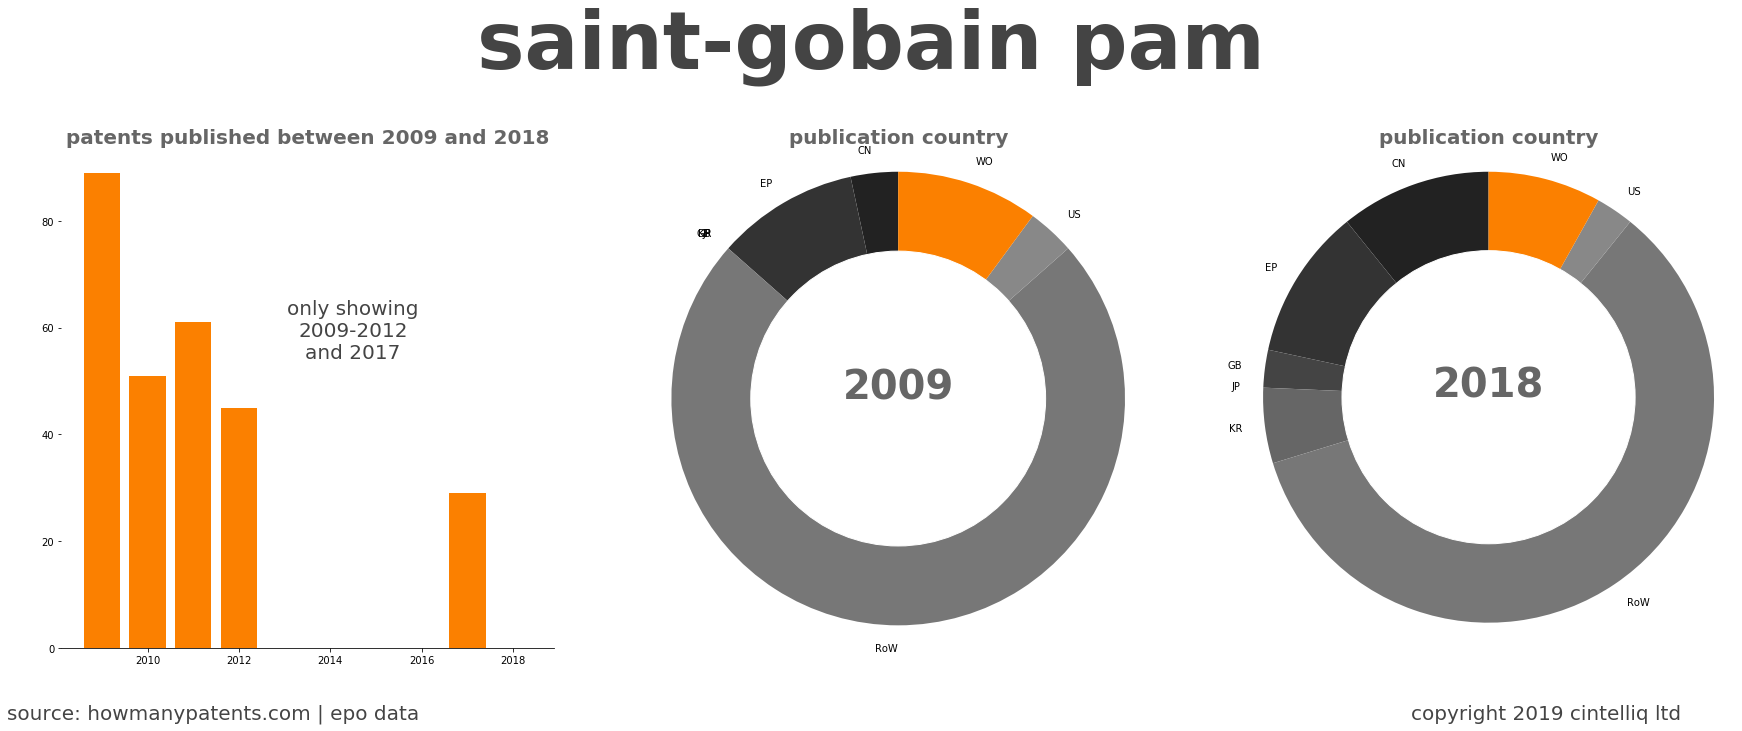 summary of patents for Saint-Gobain Pam